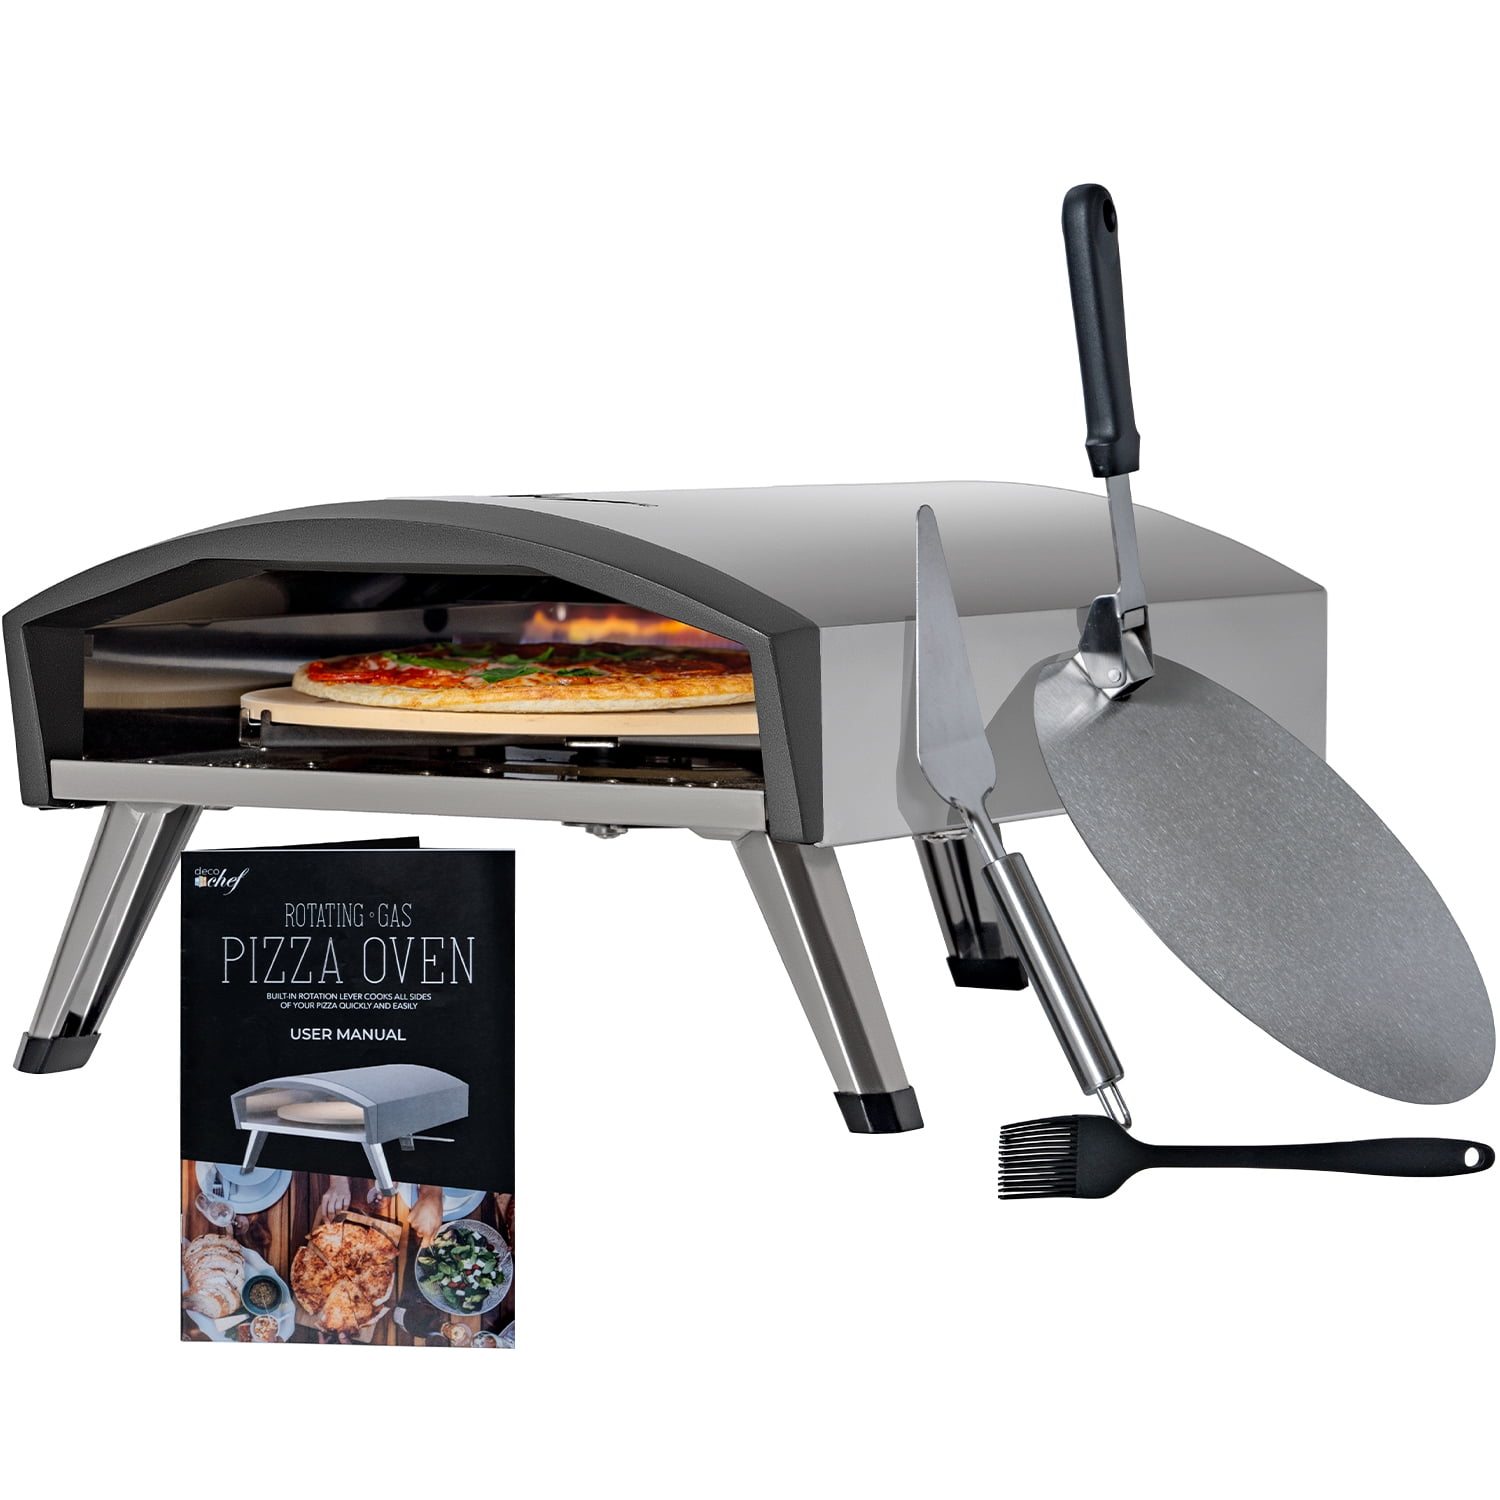 Portable Baking Oven Gas Burner Outdoor Camping Cooking Machine Grill Gas  Stove Pizza Oven Cooker Horno Pizza Electrico